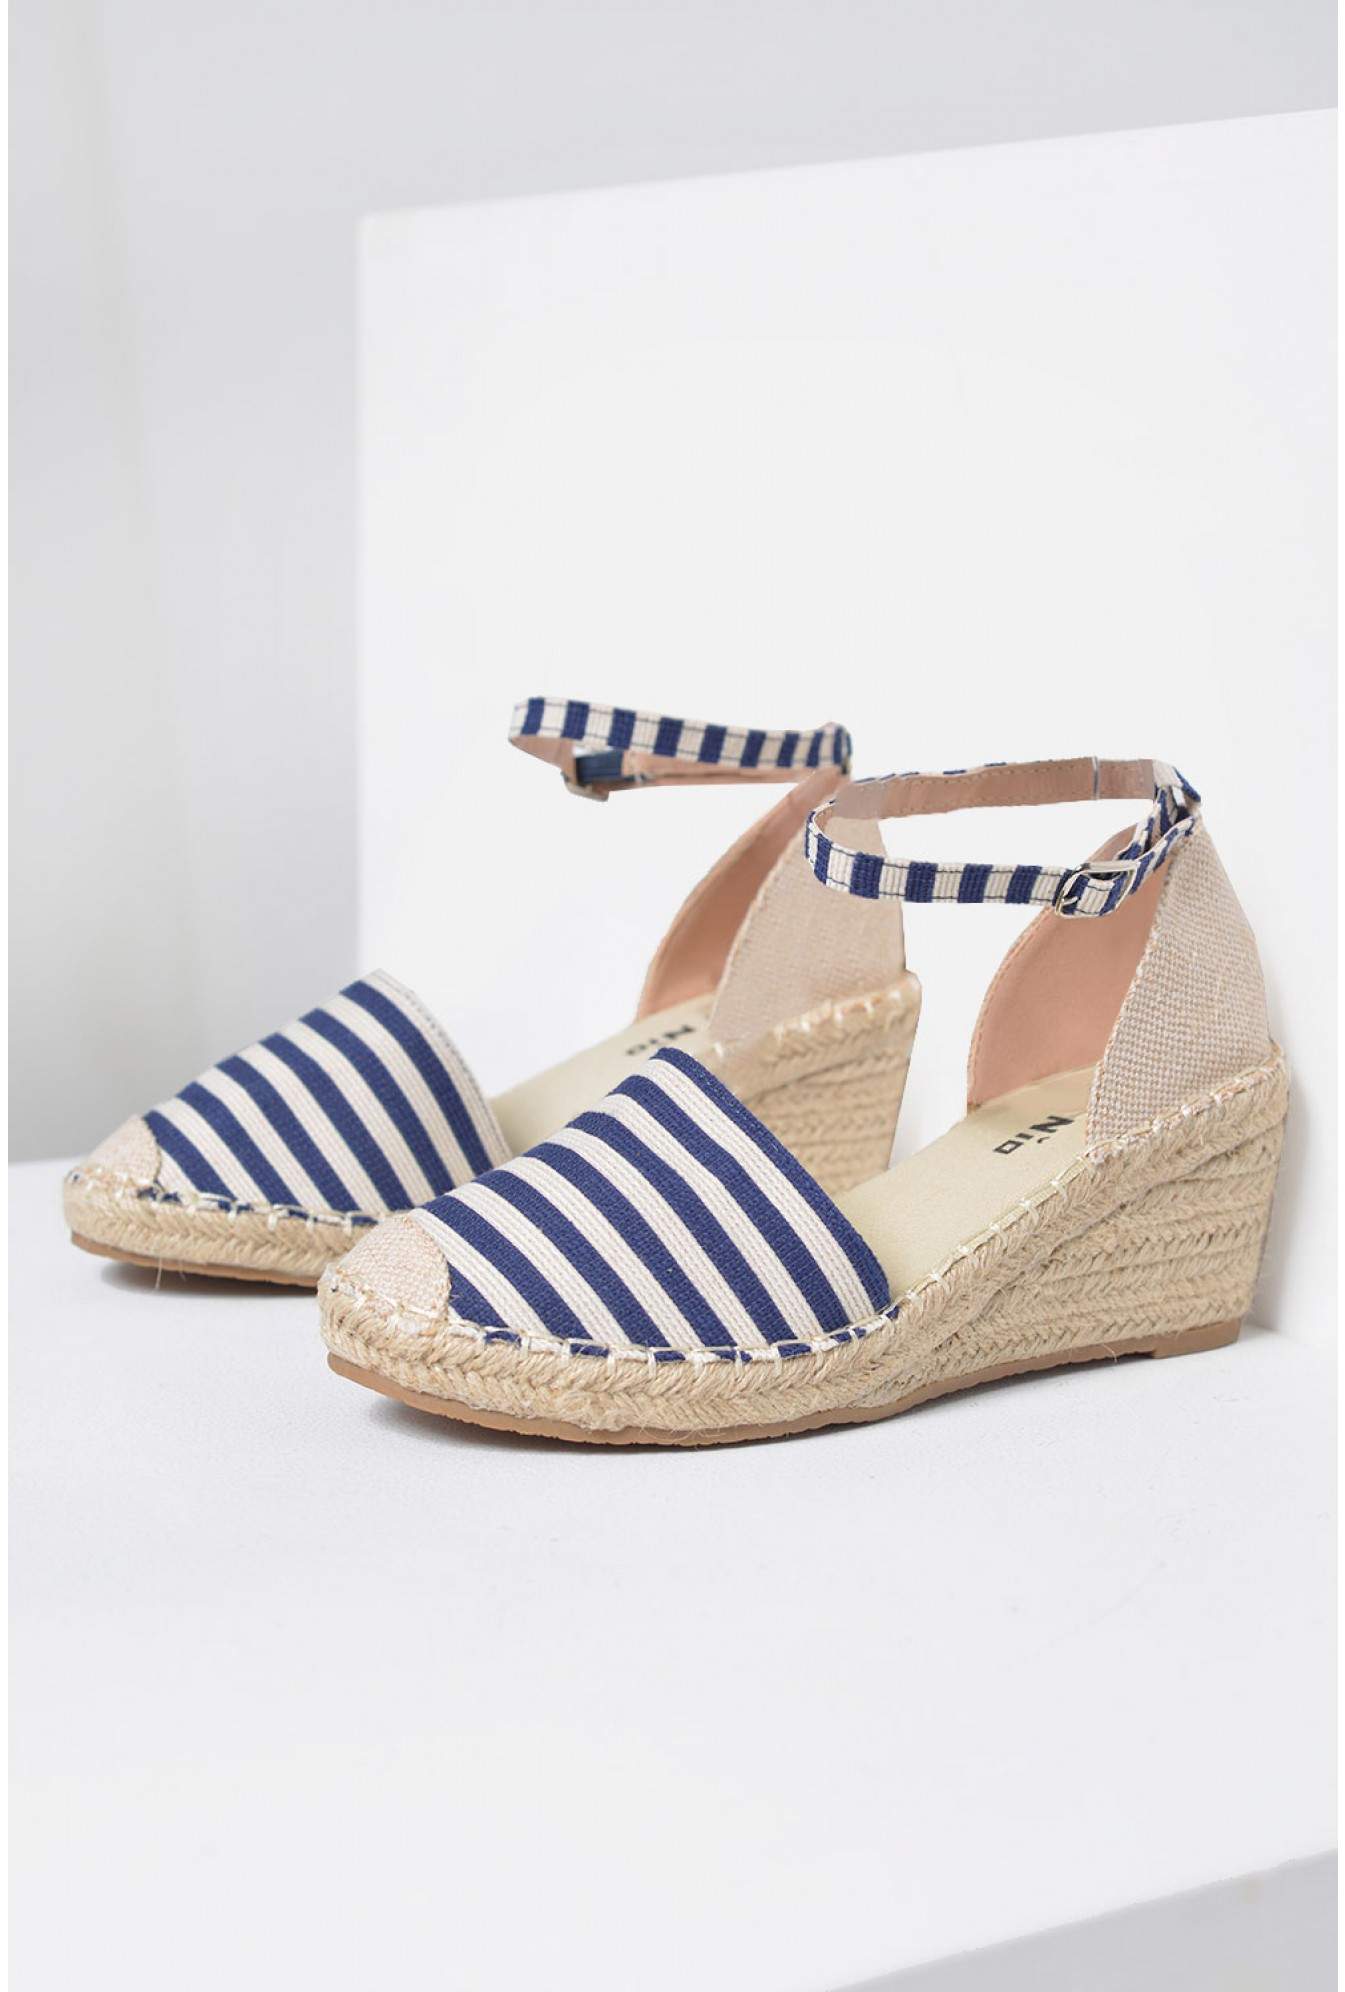 No Doubt Mimi Striped Espadrille Wedges in Navy | iCLOTHING